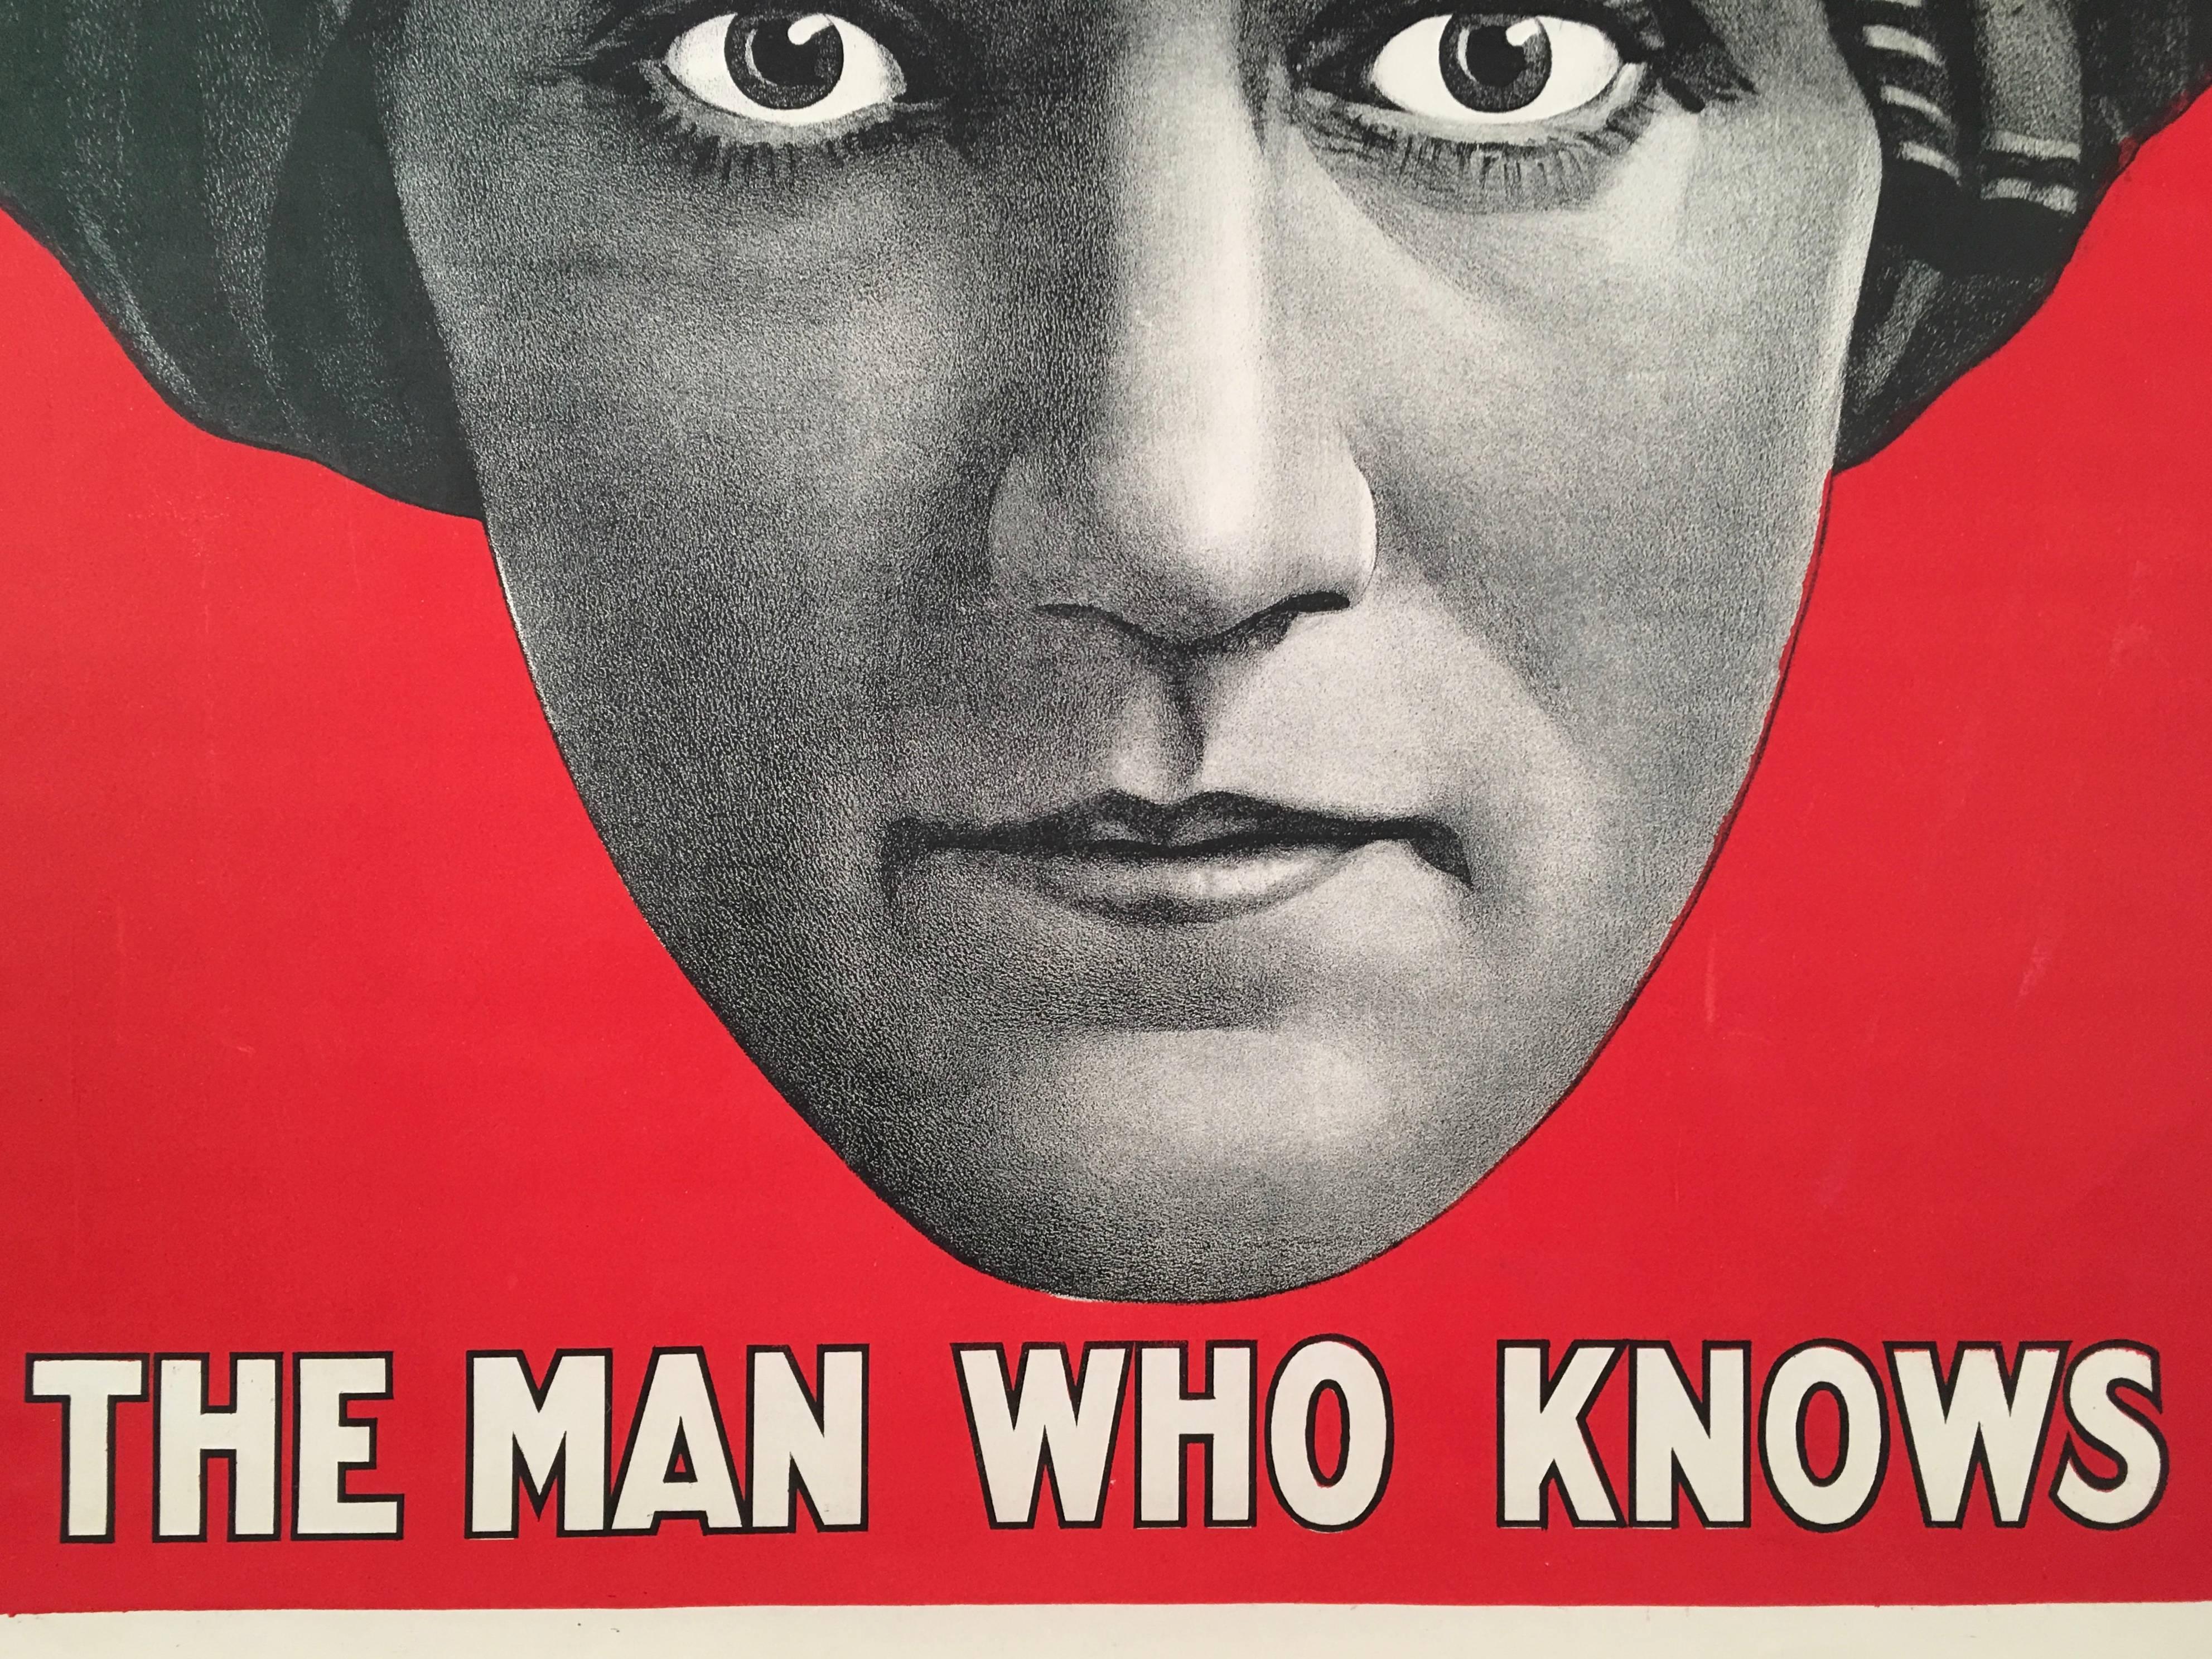 American Original Alexander 'The Man Who Knows' Magician Poster